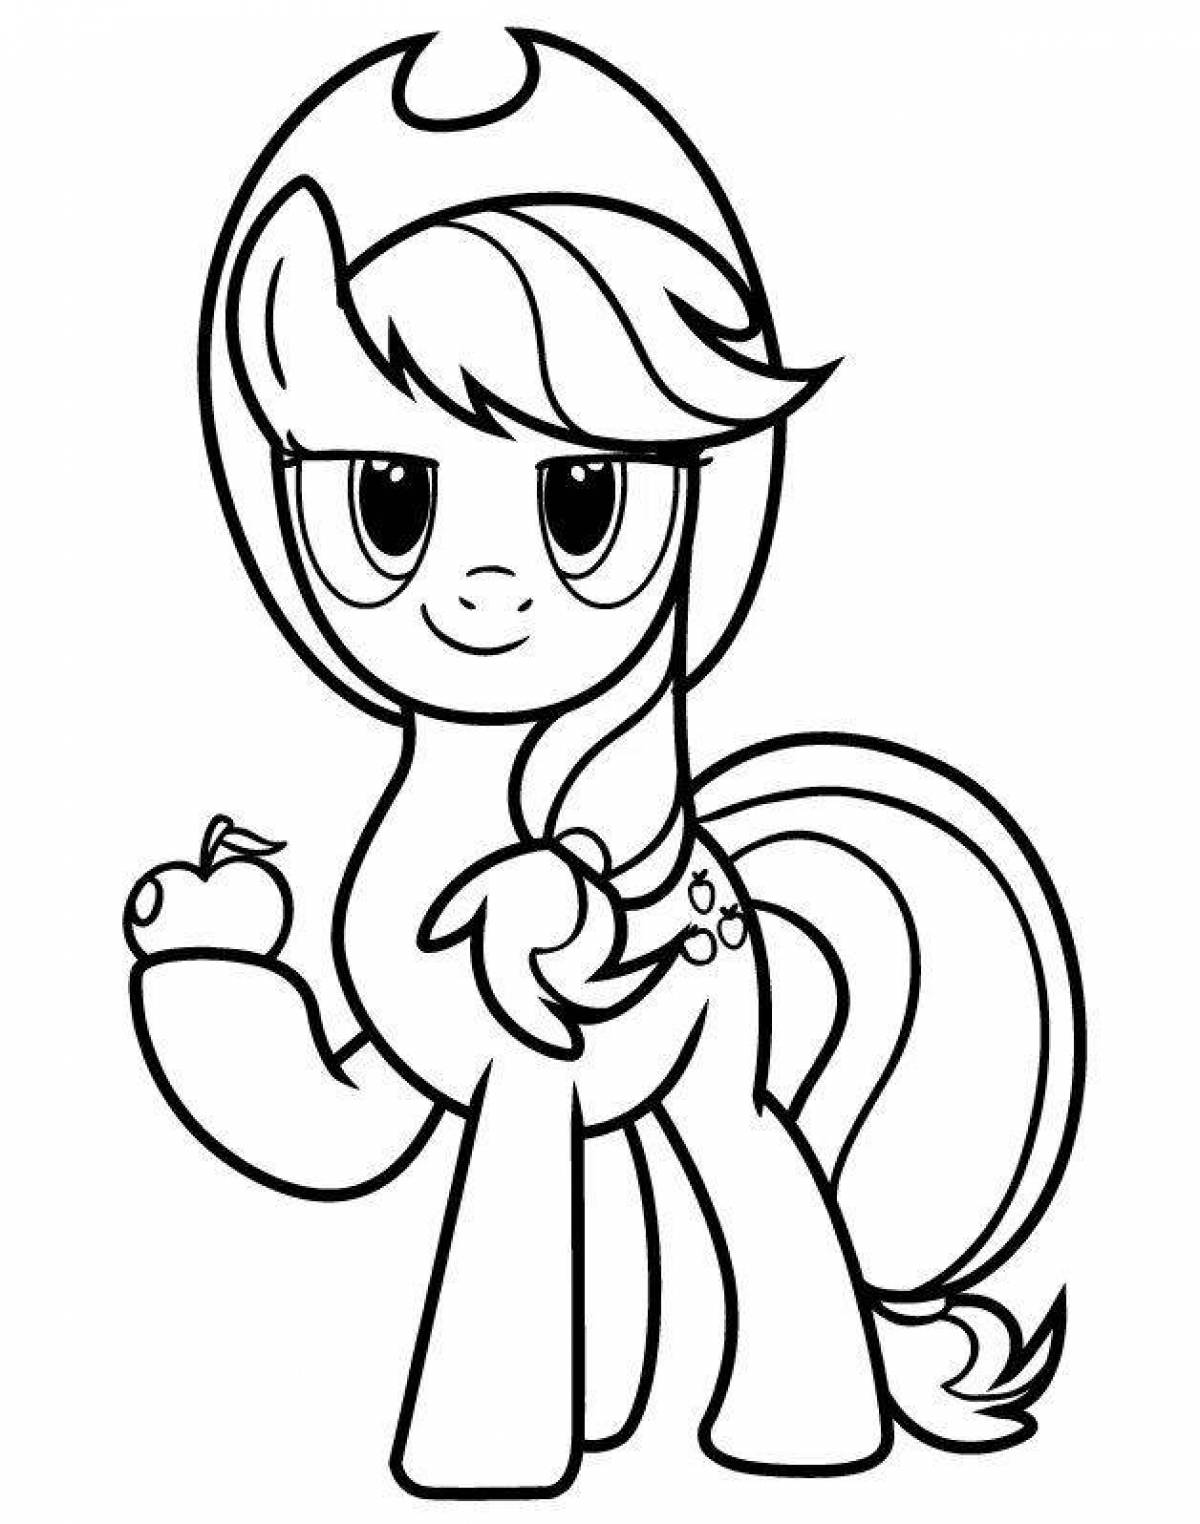 Applejack holiday pony coloring page